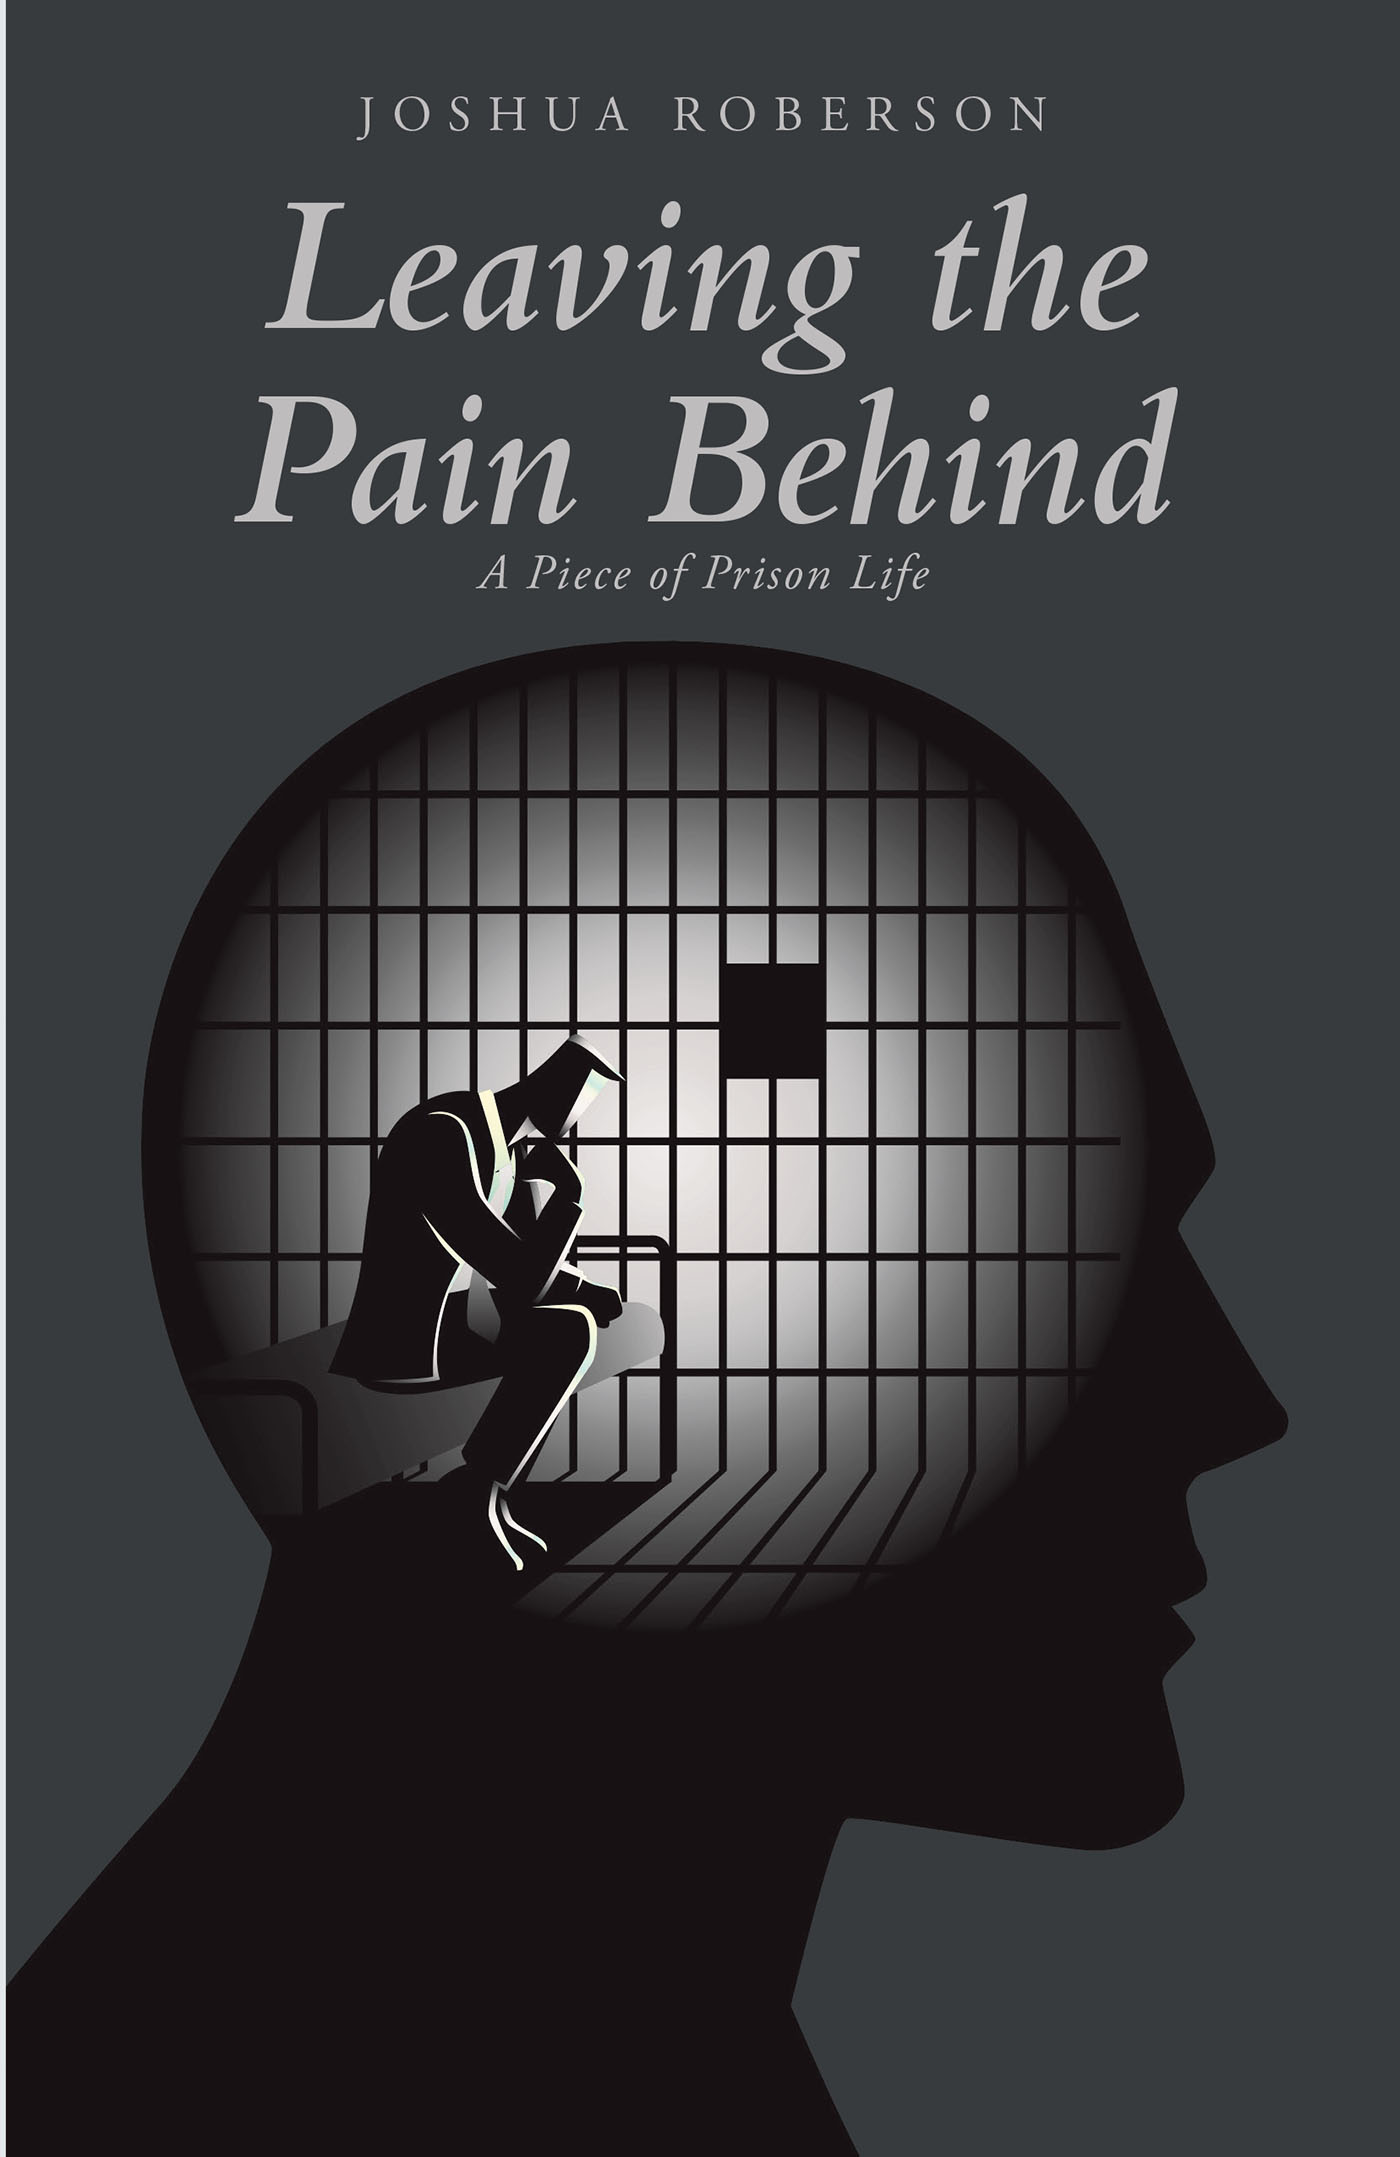 Author Joshua Roberson’s New Book, "Leaving the Pain Behind: A Piece of Prison Life," Explores the Dangers of a Prison Mind and How One Can Break Free from Their Own